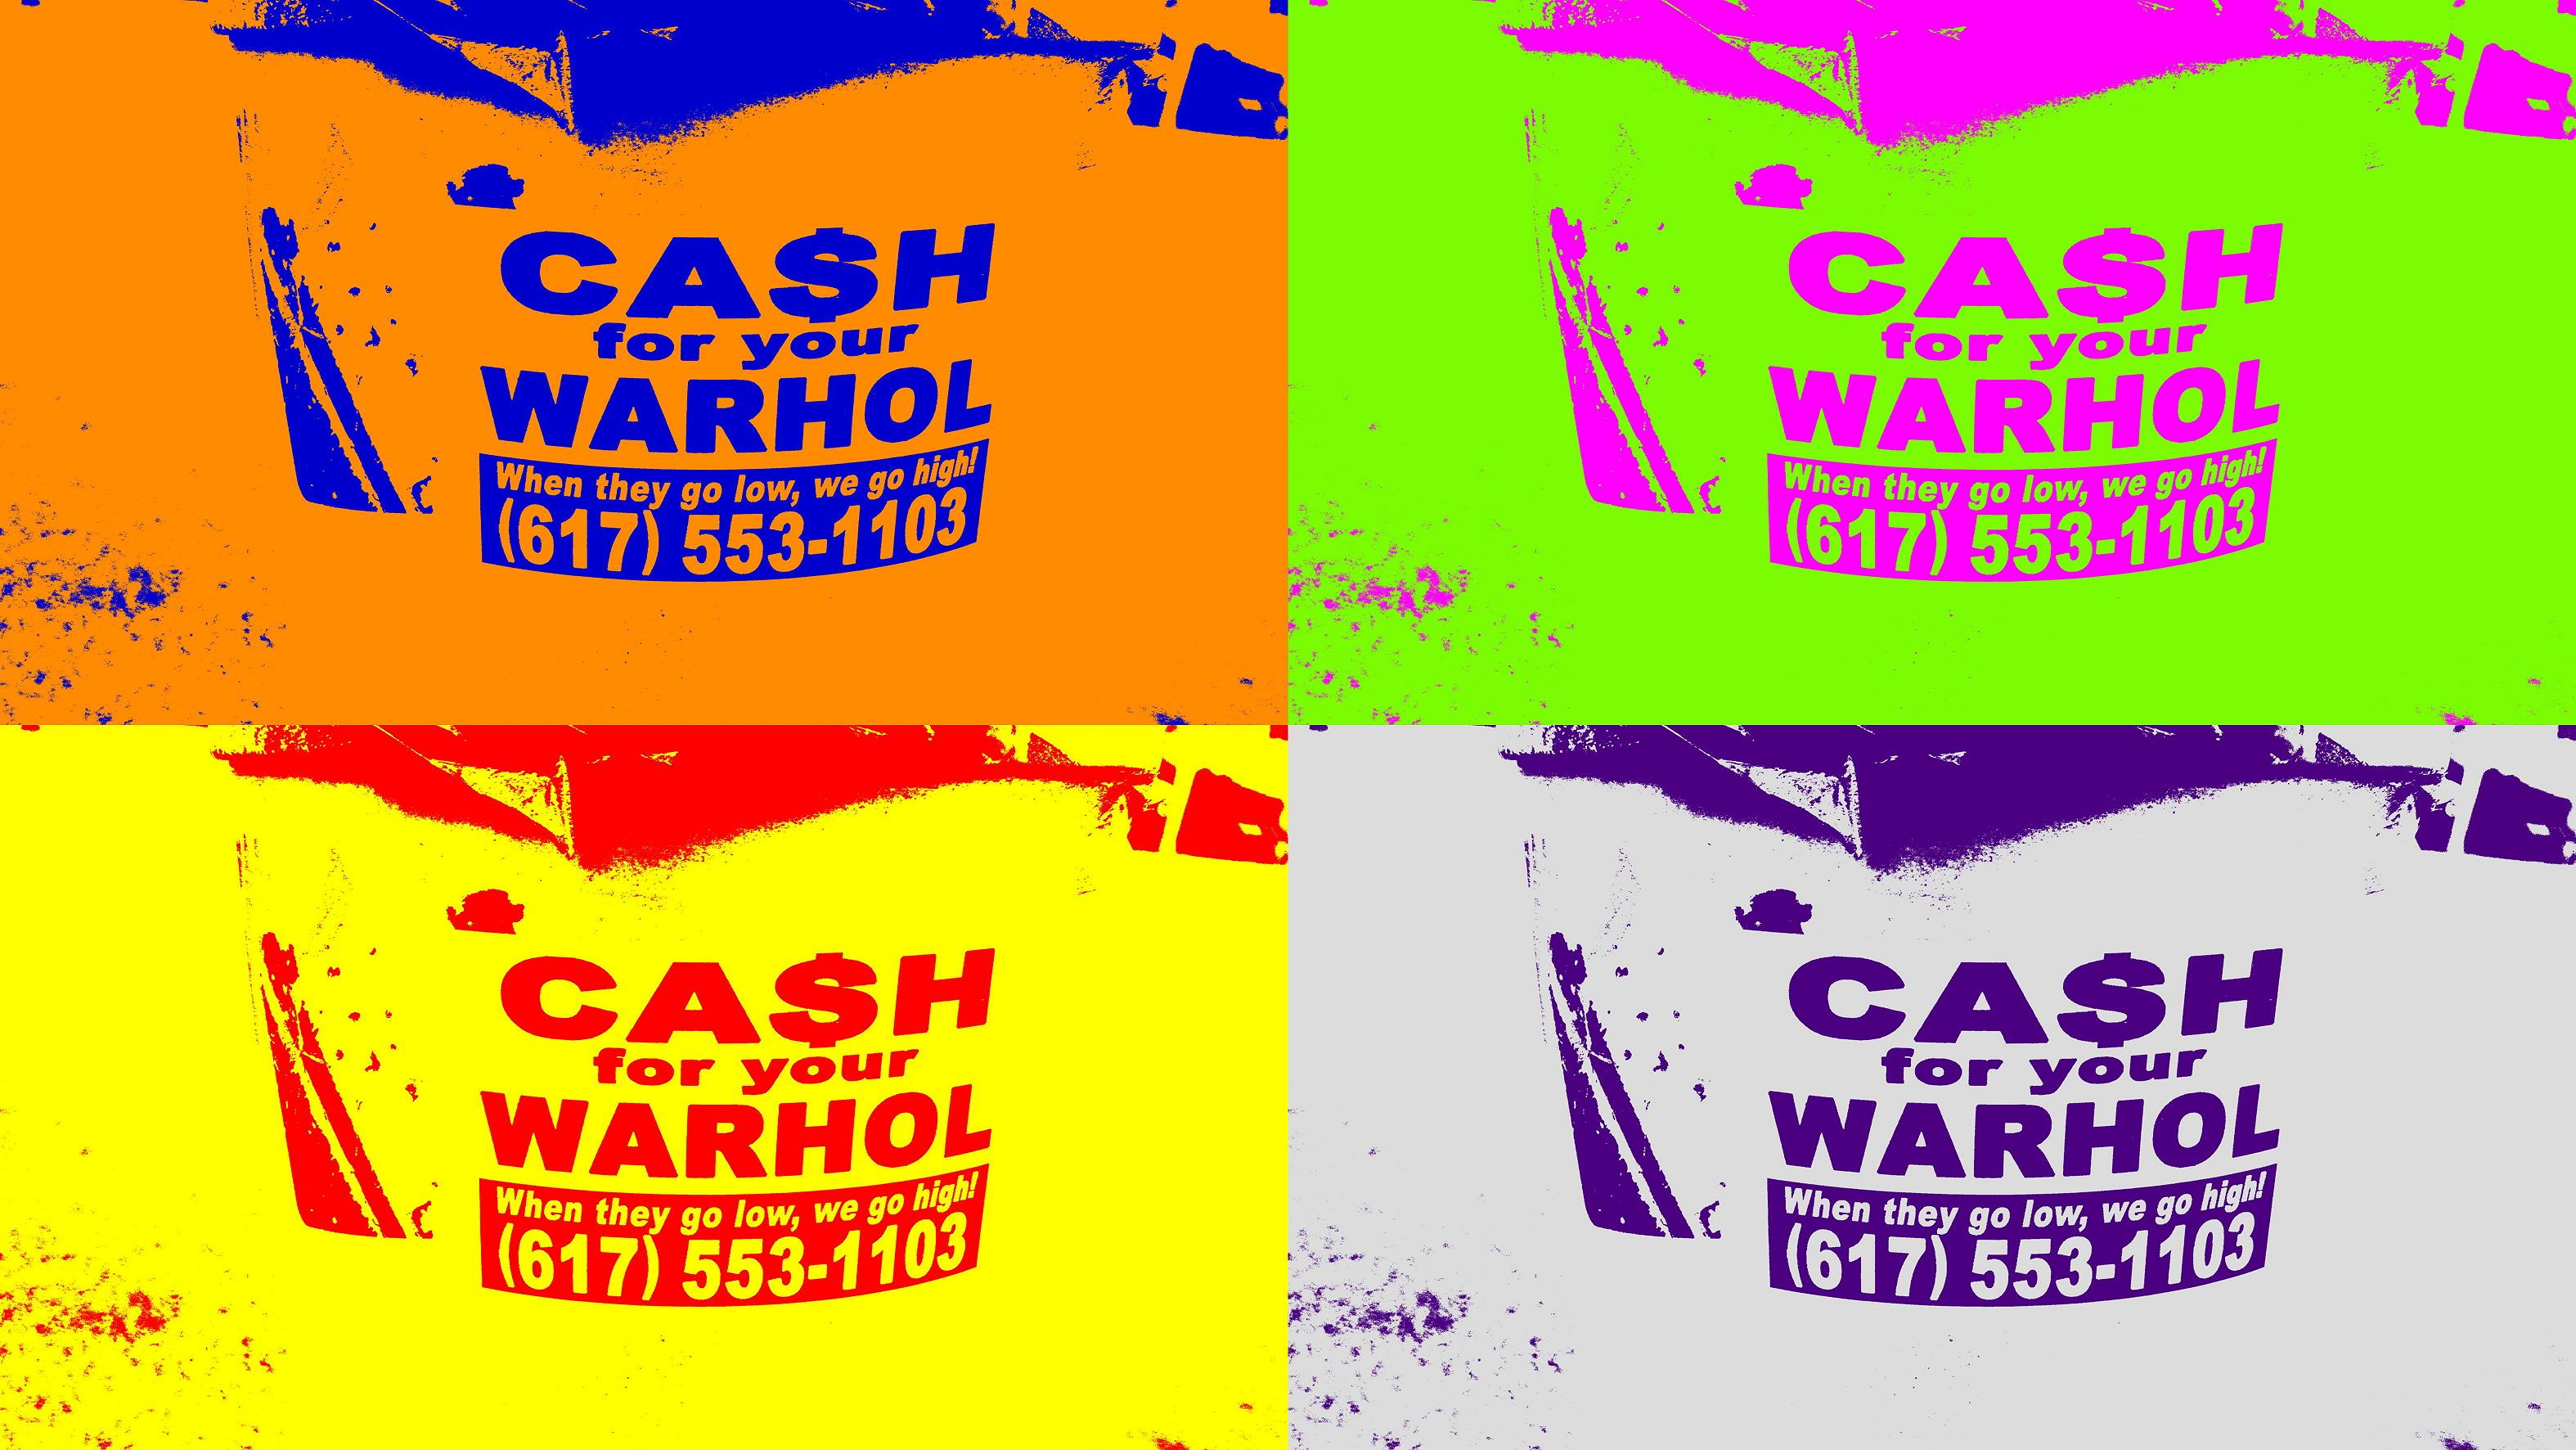 Cash For Your Warhol!